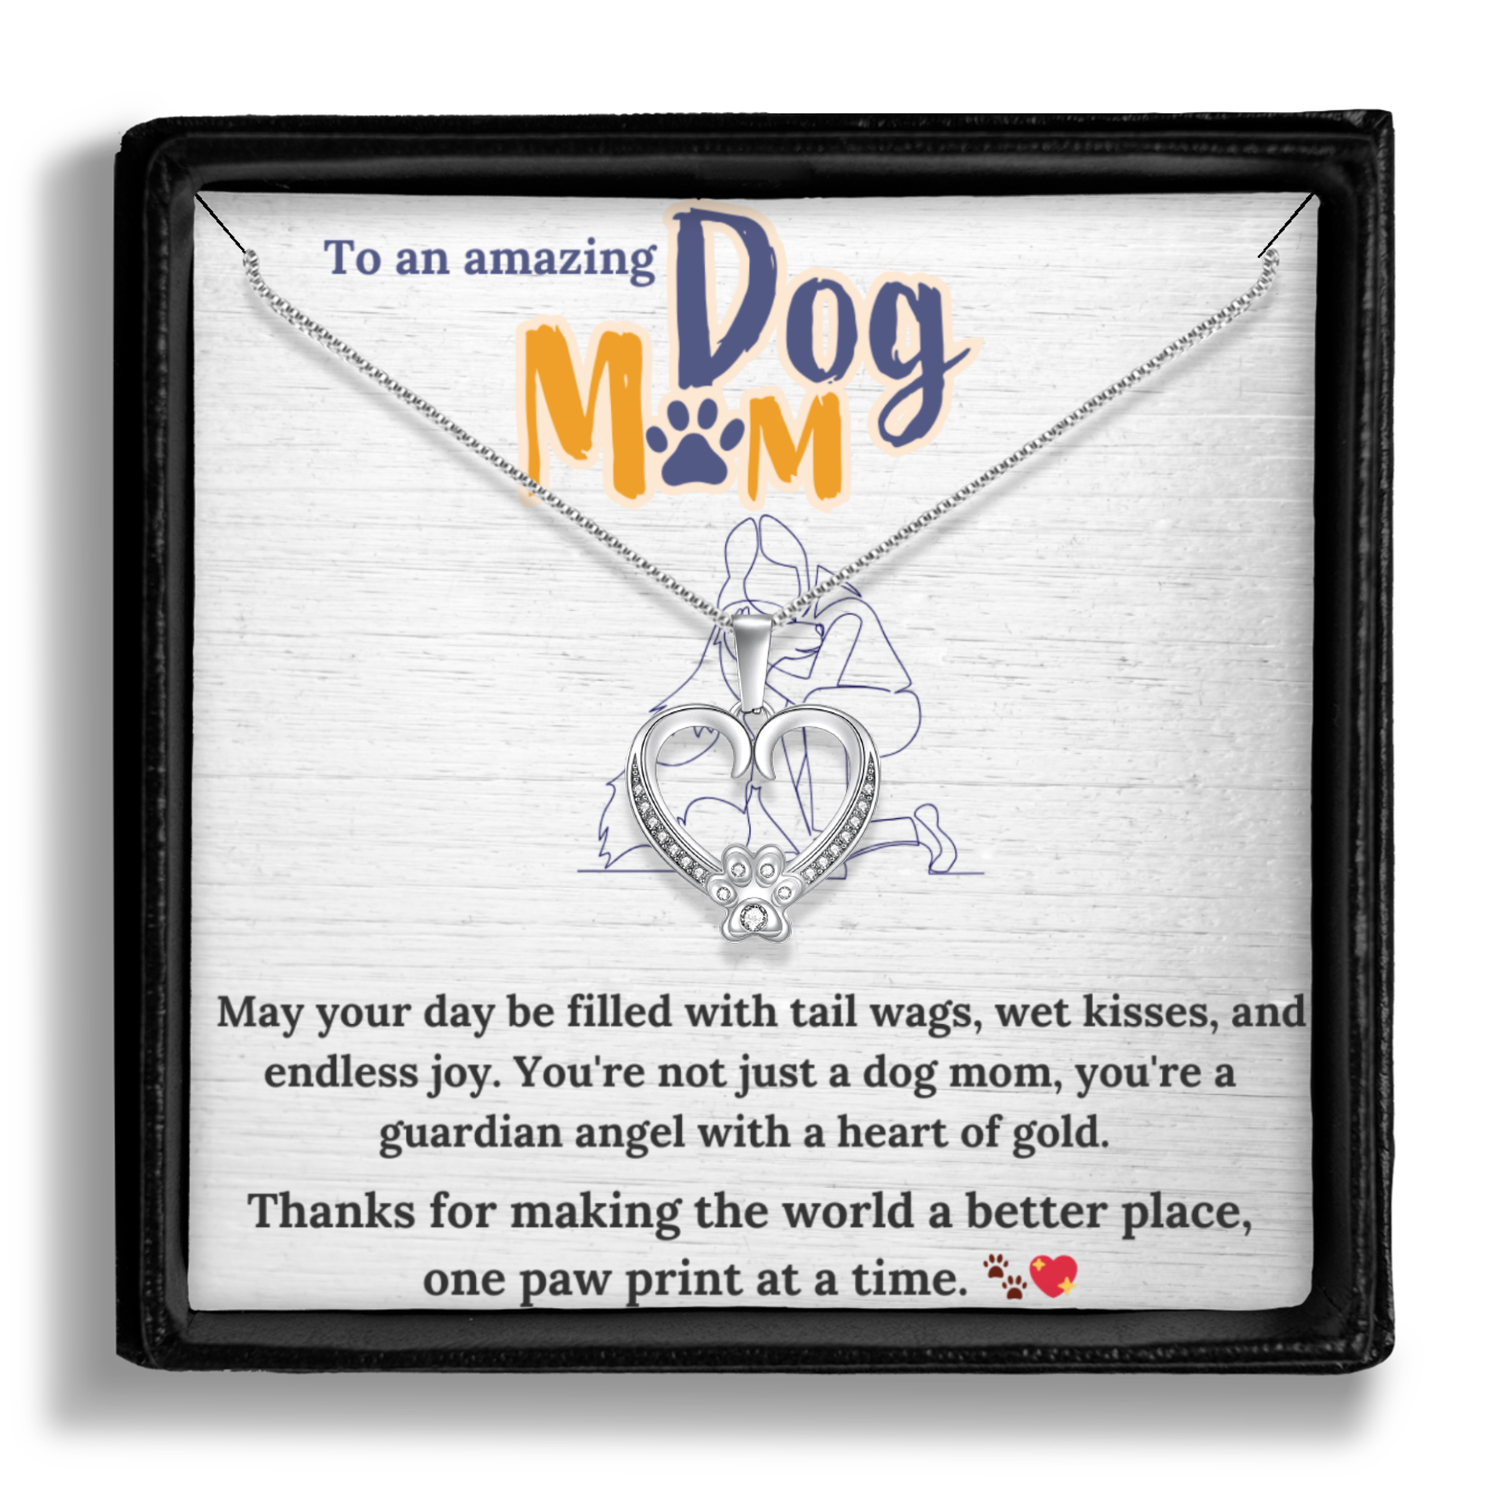 Personalized Necklaces + Message Cards - Paw Necklace With Card Insert 